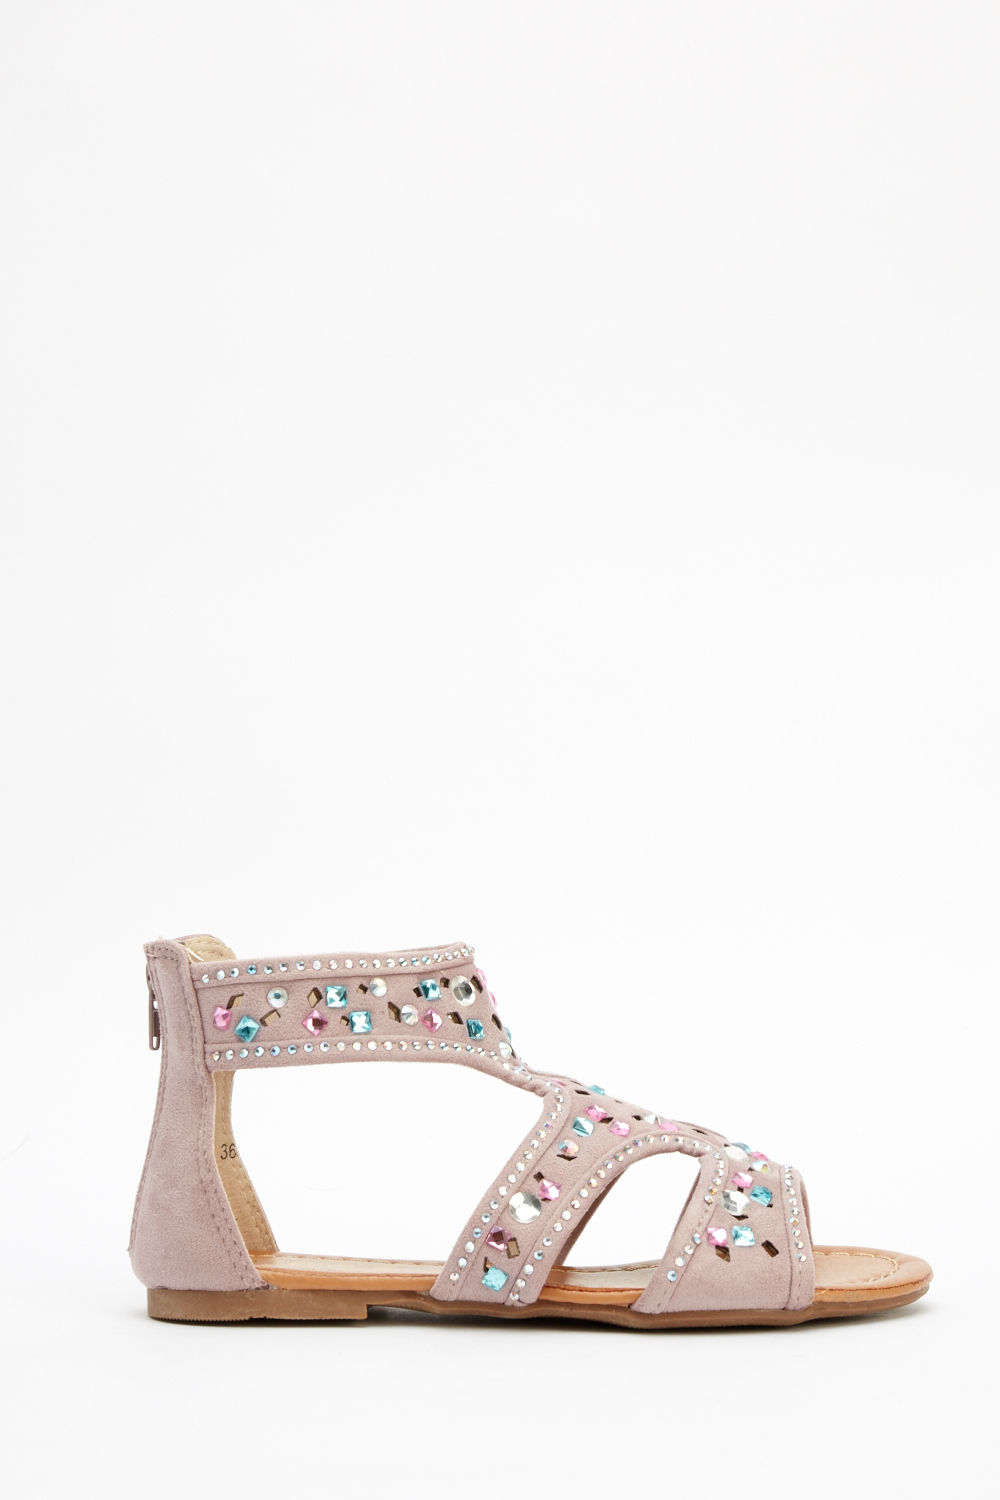 Cut Out Encrusted Ankle Sandals - Just $7